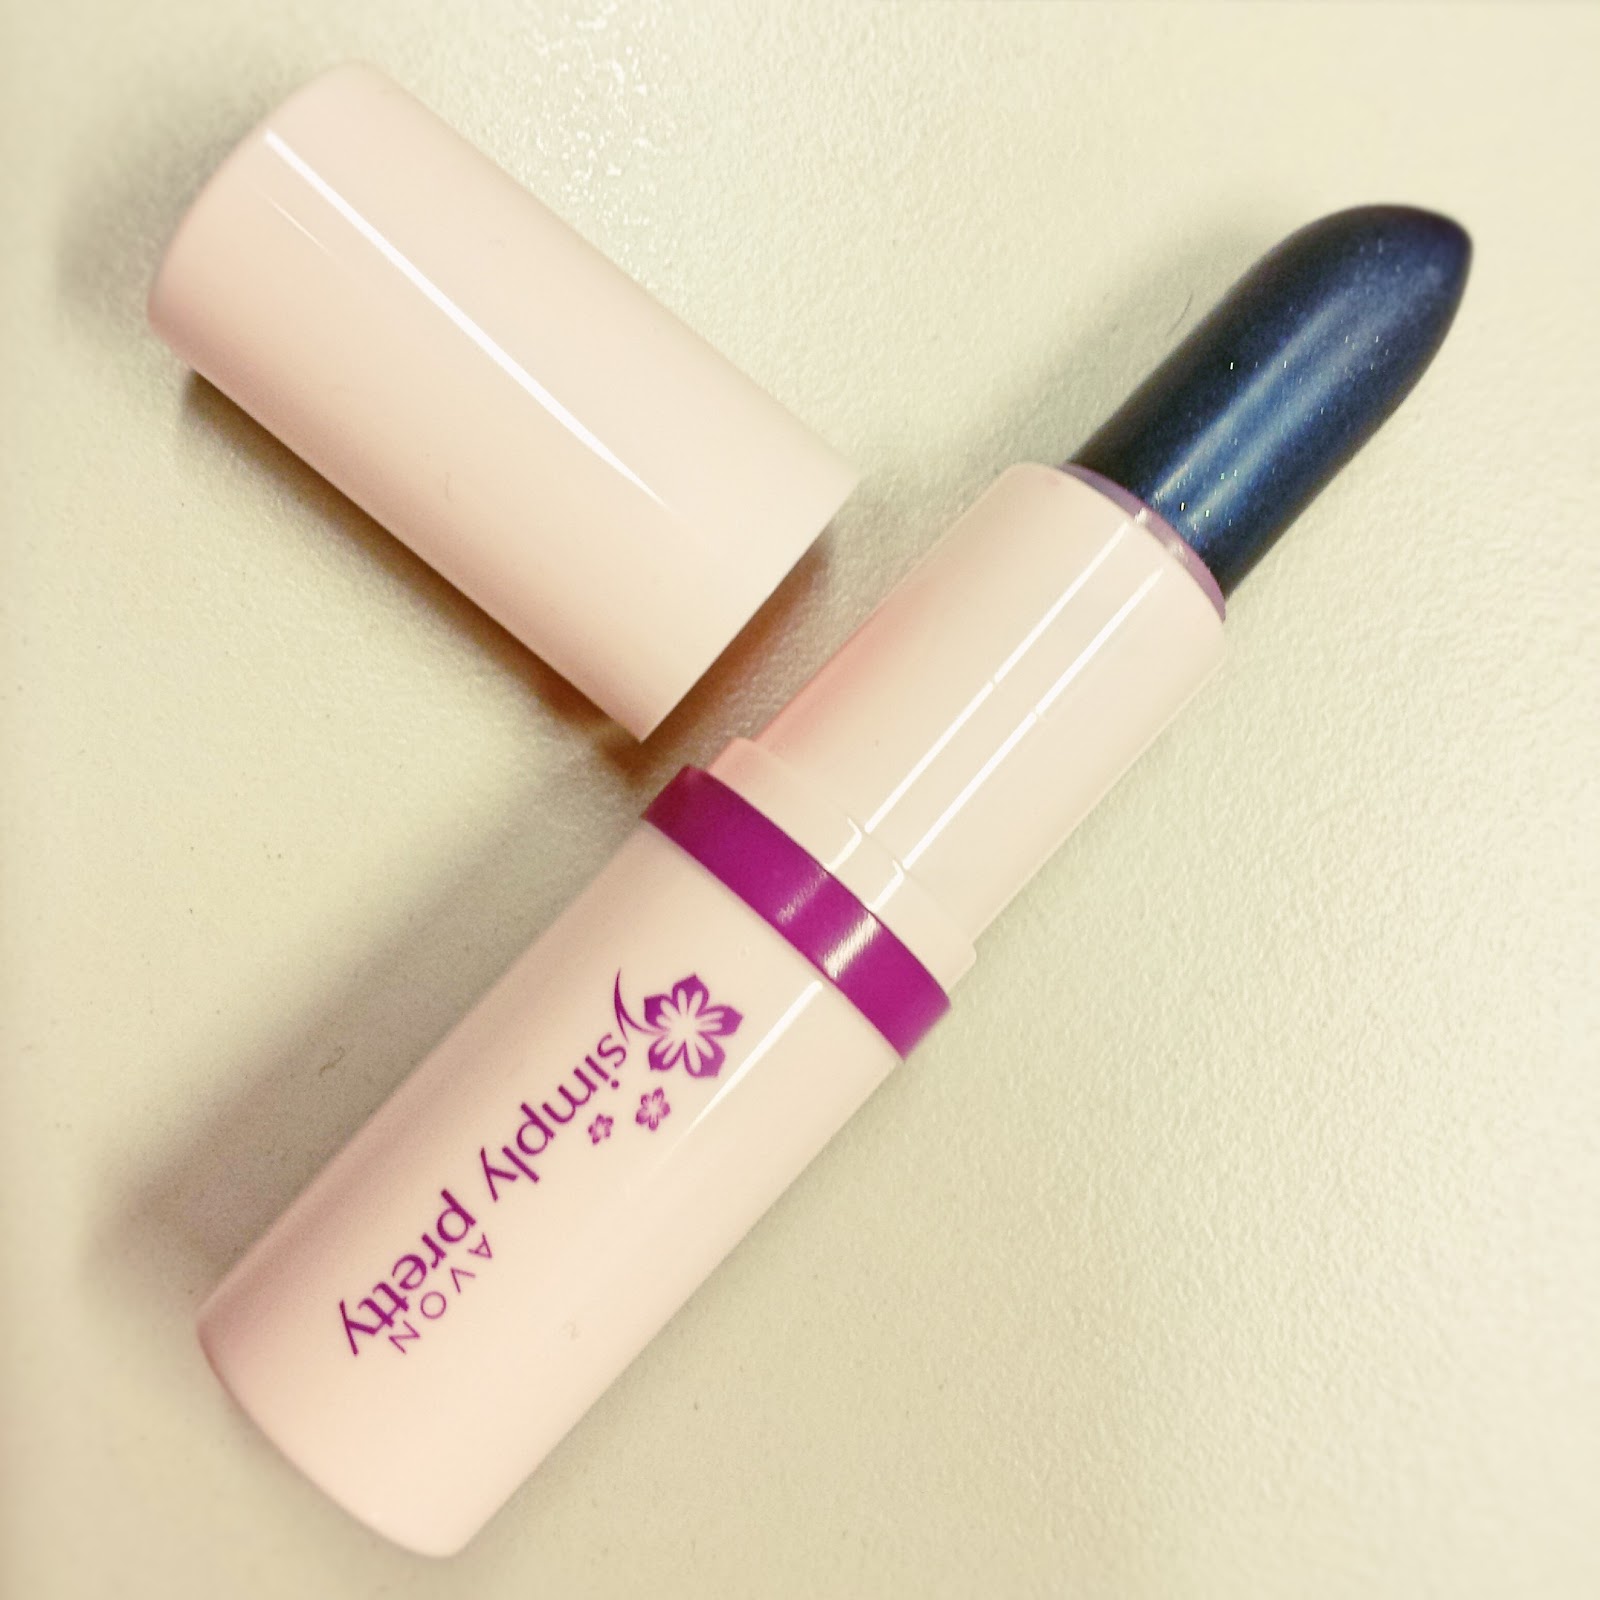 Avon Simply Pretty Color Magic Lipstick in Sweet Blueberry Product Review